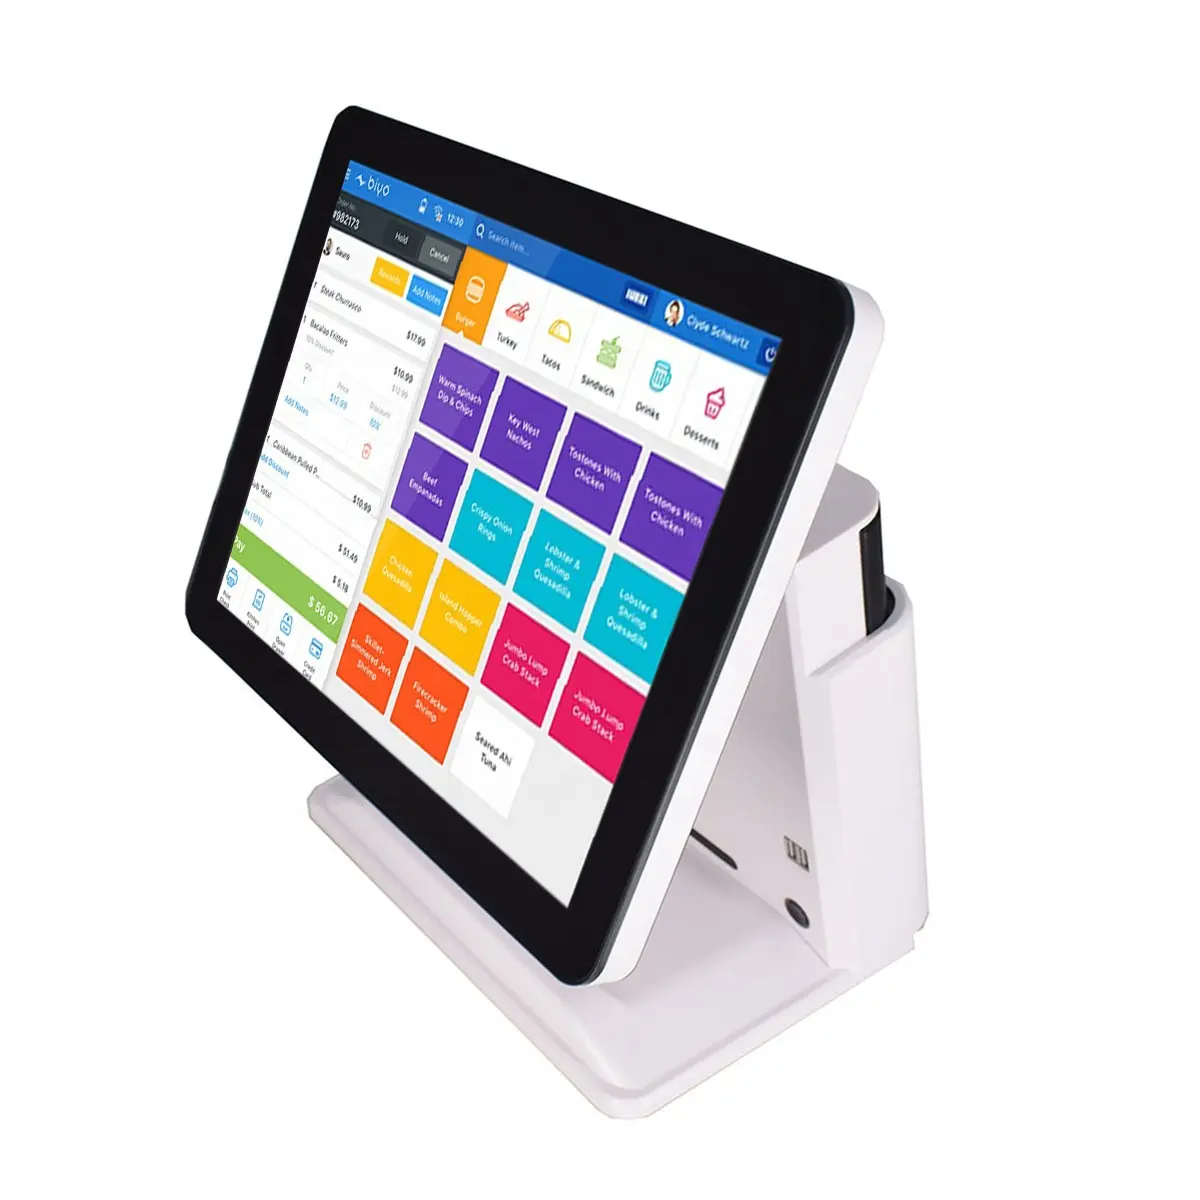 15 Inch Touchscreen Alles In Één Touchscreen Pos-Systeemvenster S Pos-Monitor